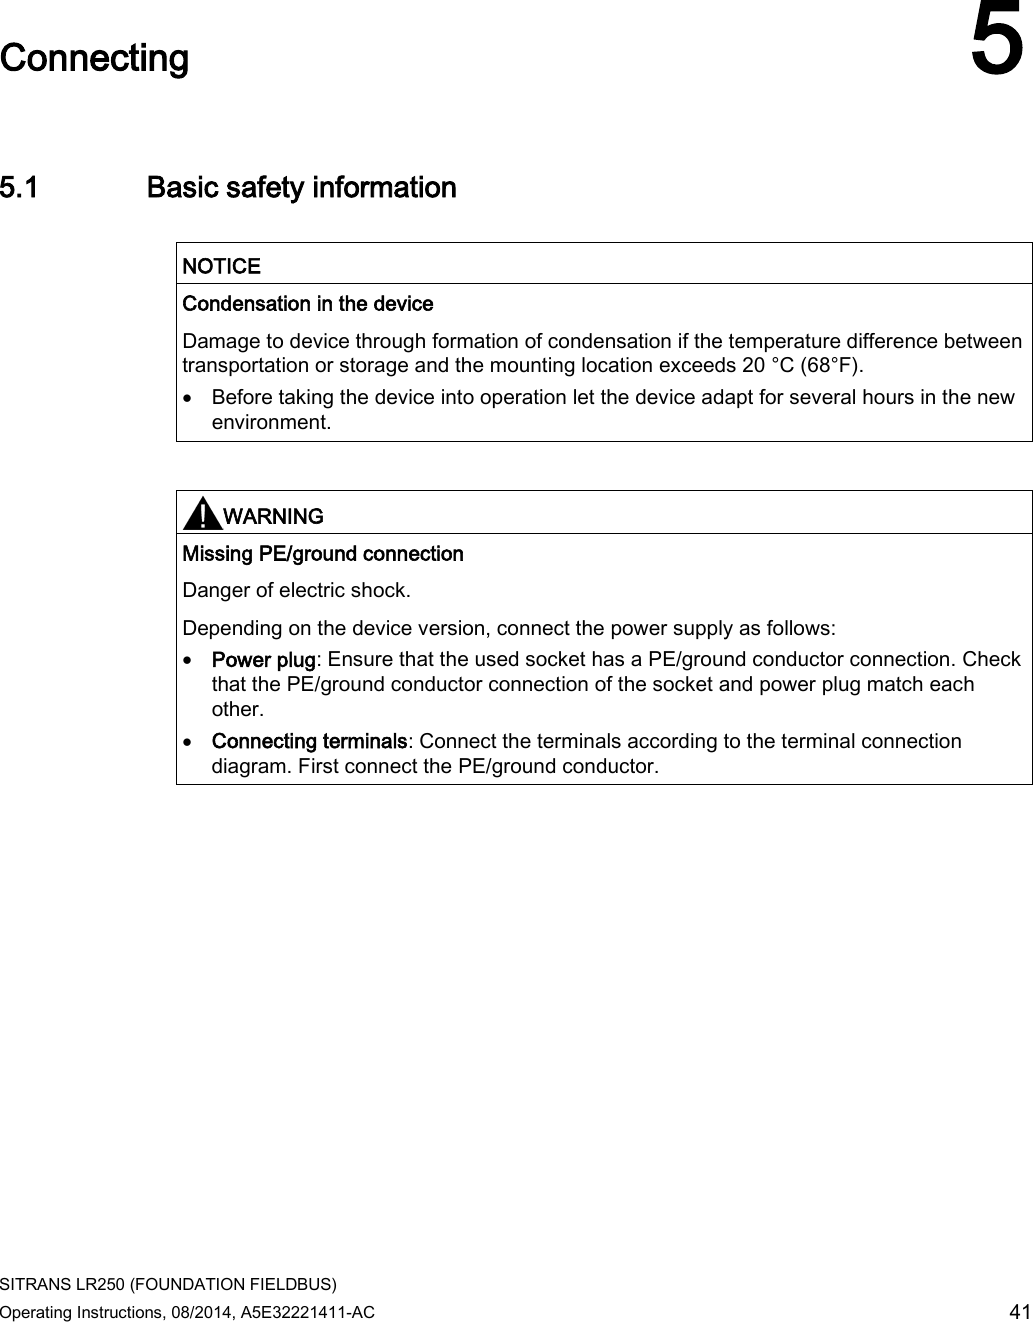  SITRANS LR250 (FOUNDATION FIELDBUS) Operating Instructions, 08/2014, A5E32221411-AC 41  Connecting 5 5.1 Basic safety information   NOTICE Condensation in the device Damage to device through formation of condensation if the temperature difference between transportation or storage and the mounting location exceeds 20 °C (68°F). • Before taking the device into operation let the device adapt for several hours in the new environment.    WARNING Missing PE/ground connection Danger of electric shock. Depending on the device version, connect the power supply as follows: • Power plug: Ensure that the used socket has a PE/ground conductor connection. Check that the PE/ground conductor connection of the socket and power plug match each other. • Connecting terminals: Connect the terminals according to the terminal connection diagram. First connect the PE/ground conductor.  